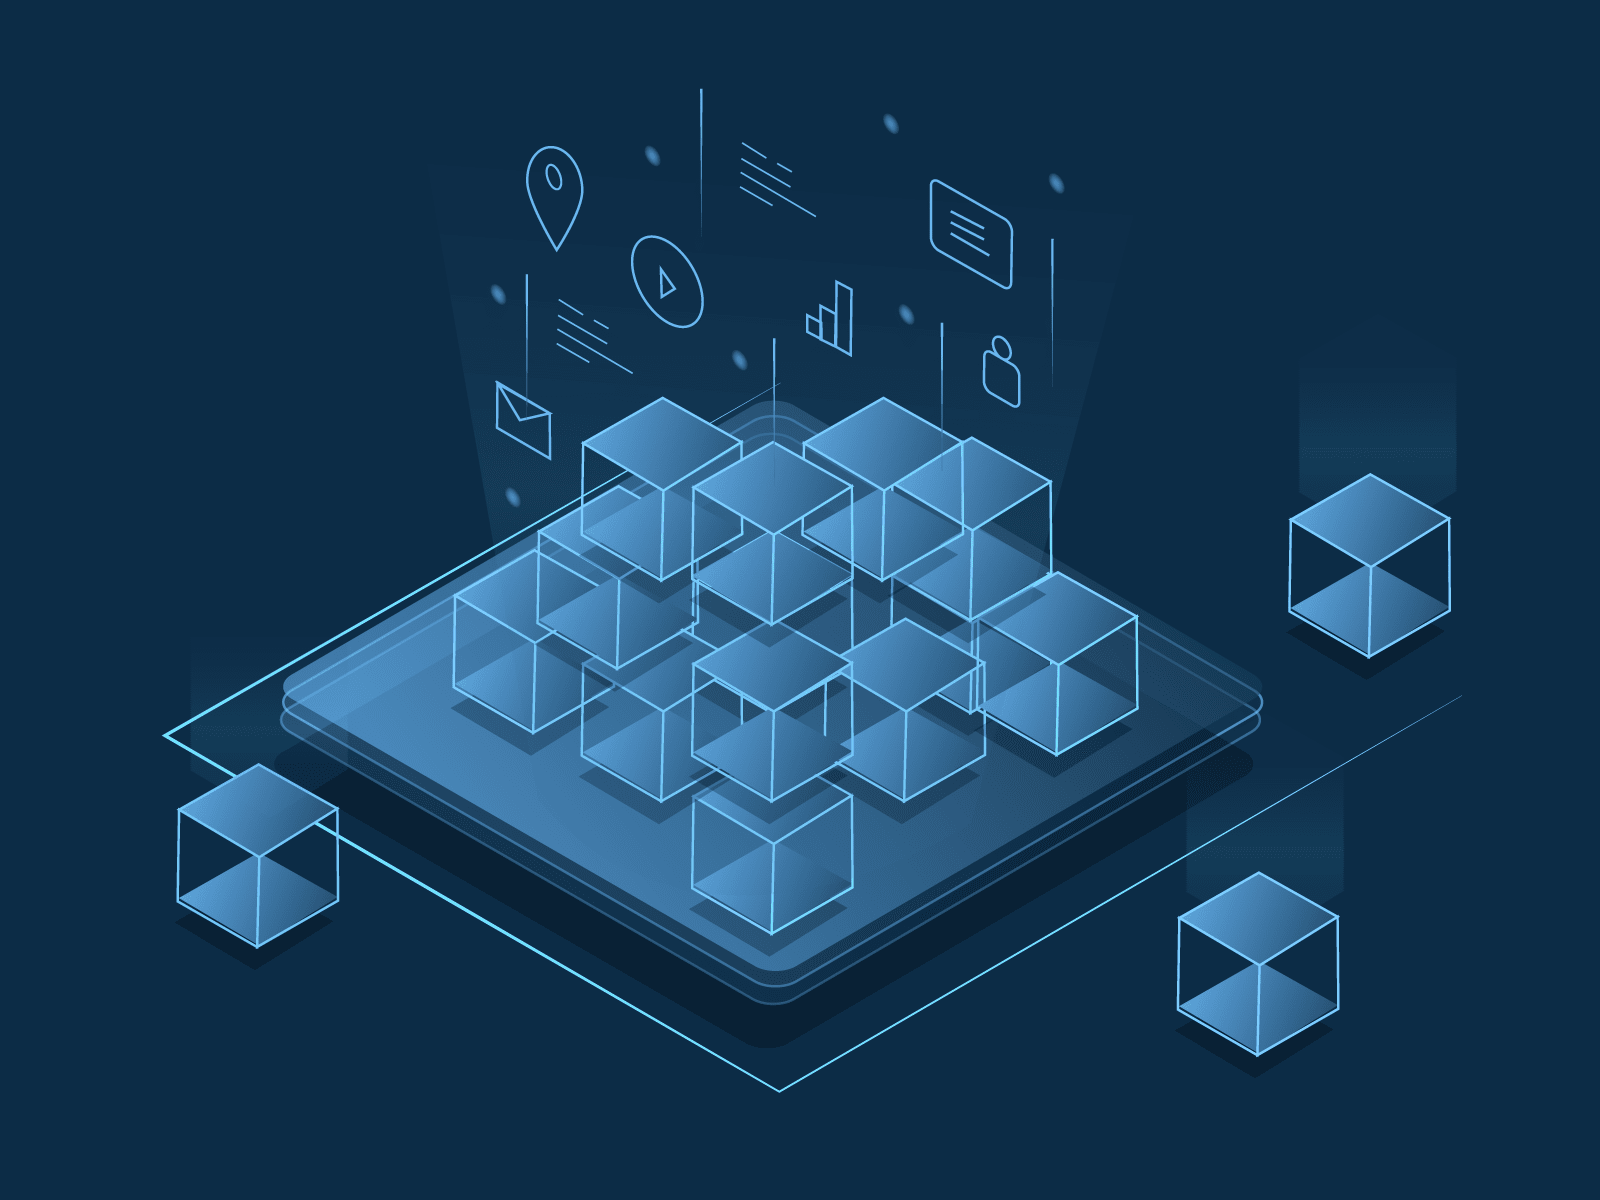 This art shows stacked 3-d blue squared with symbols floating above that reference technology and application icons. The blocs are stacked in a pyramid with extra blocks around the outside. The effect is abstract but clearly referencing organized technology. The art is shared on the website of AML Partners. AML Partners designs RegTech platform software, AML software, KYC software, and more AML Compliance solutions and GRC tools.